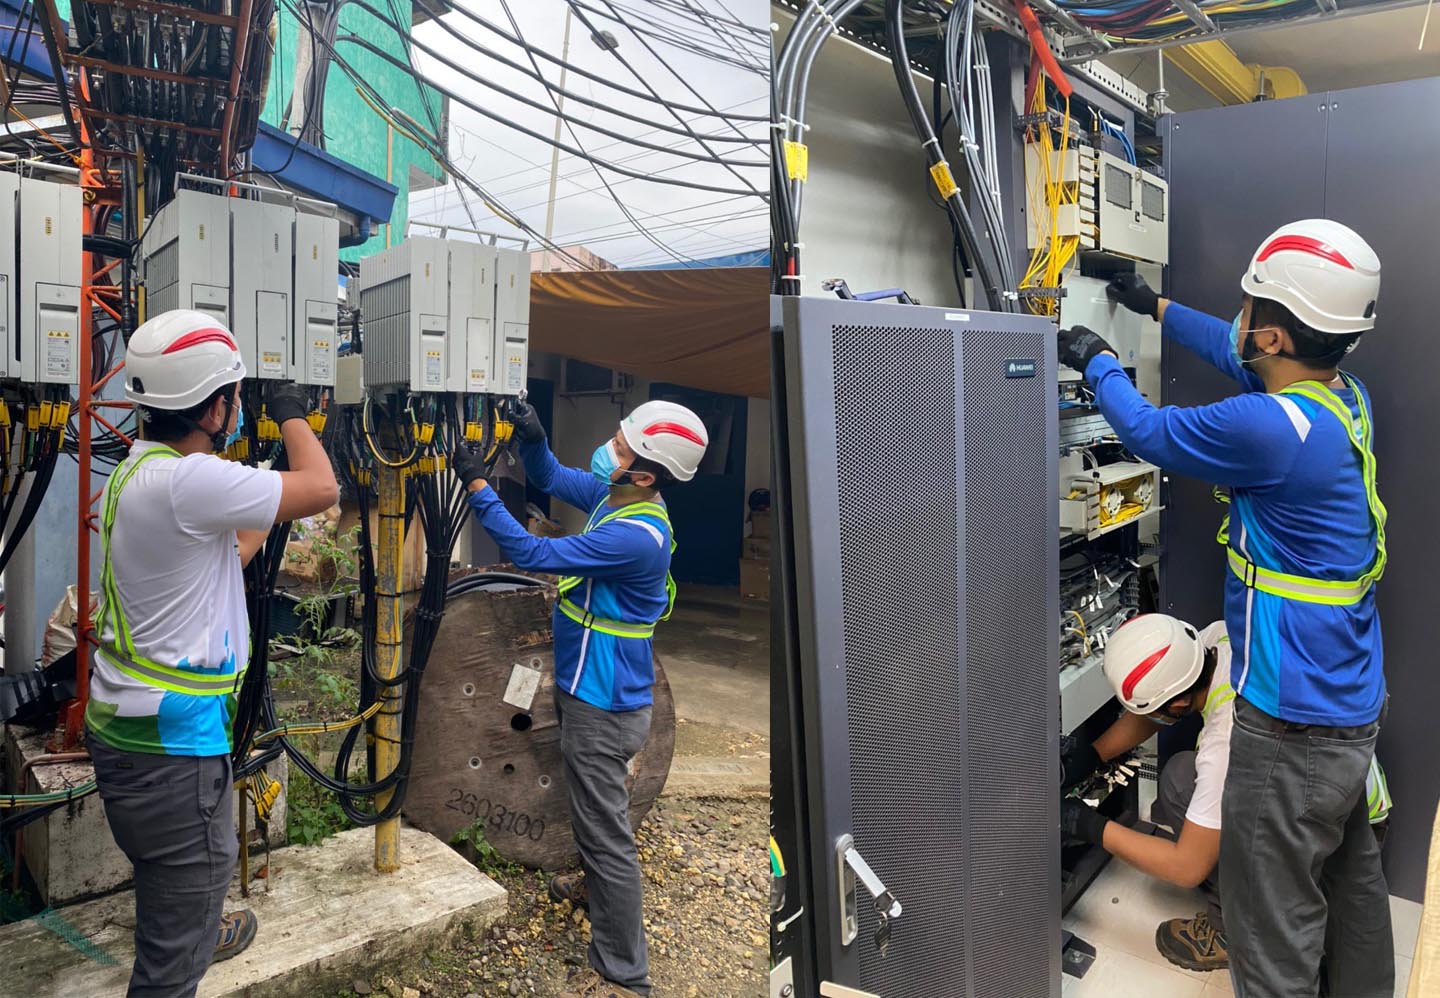 PLDT and Smart makes 4G/LTE connectivity accessible in Bohol